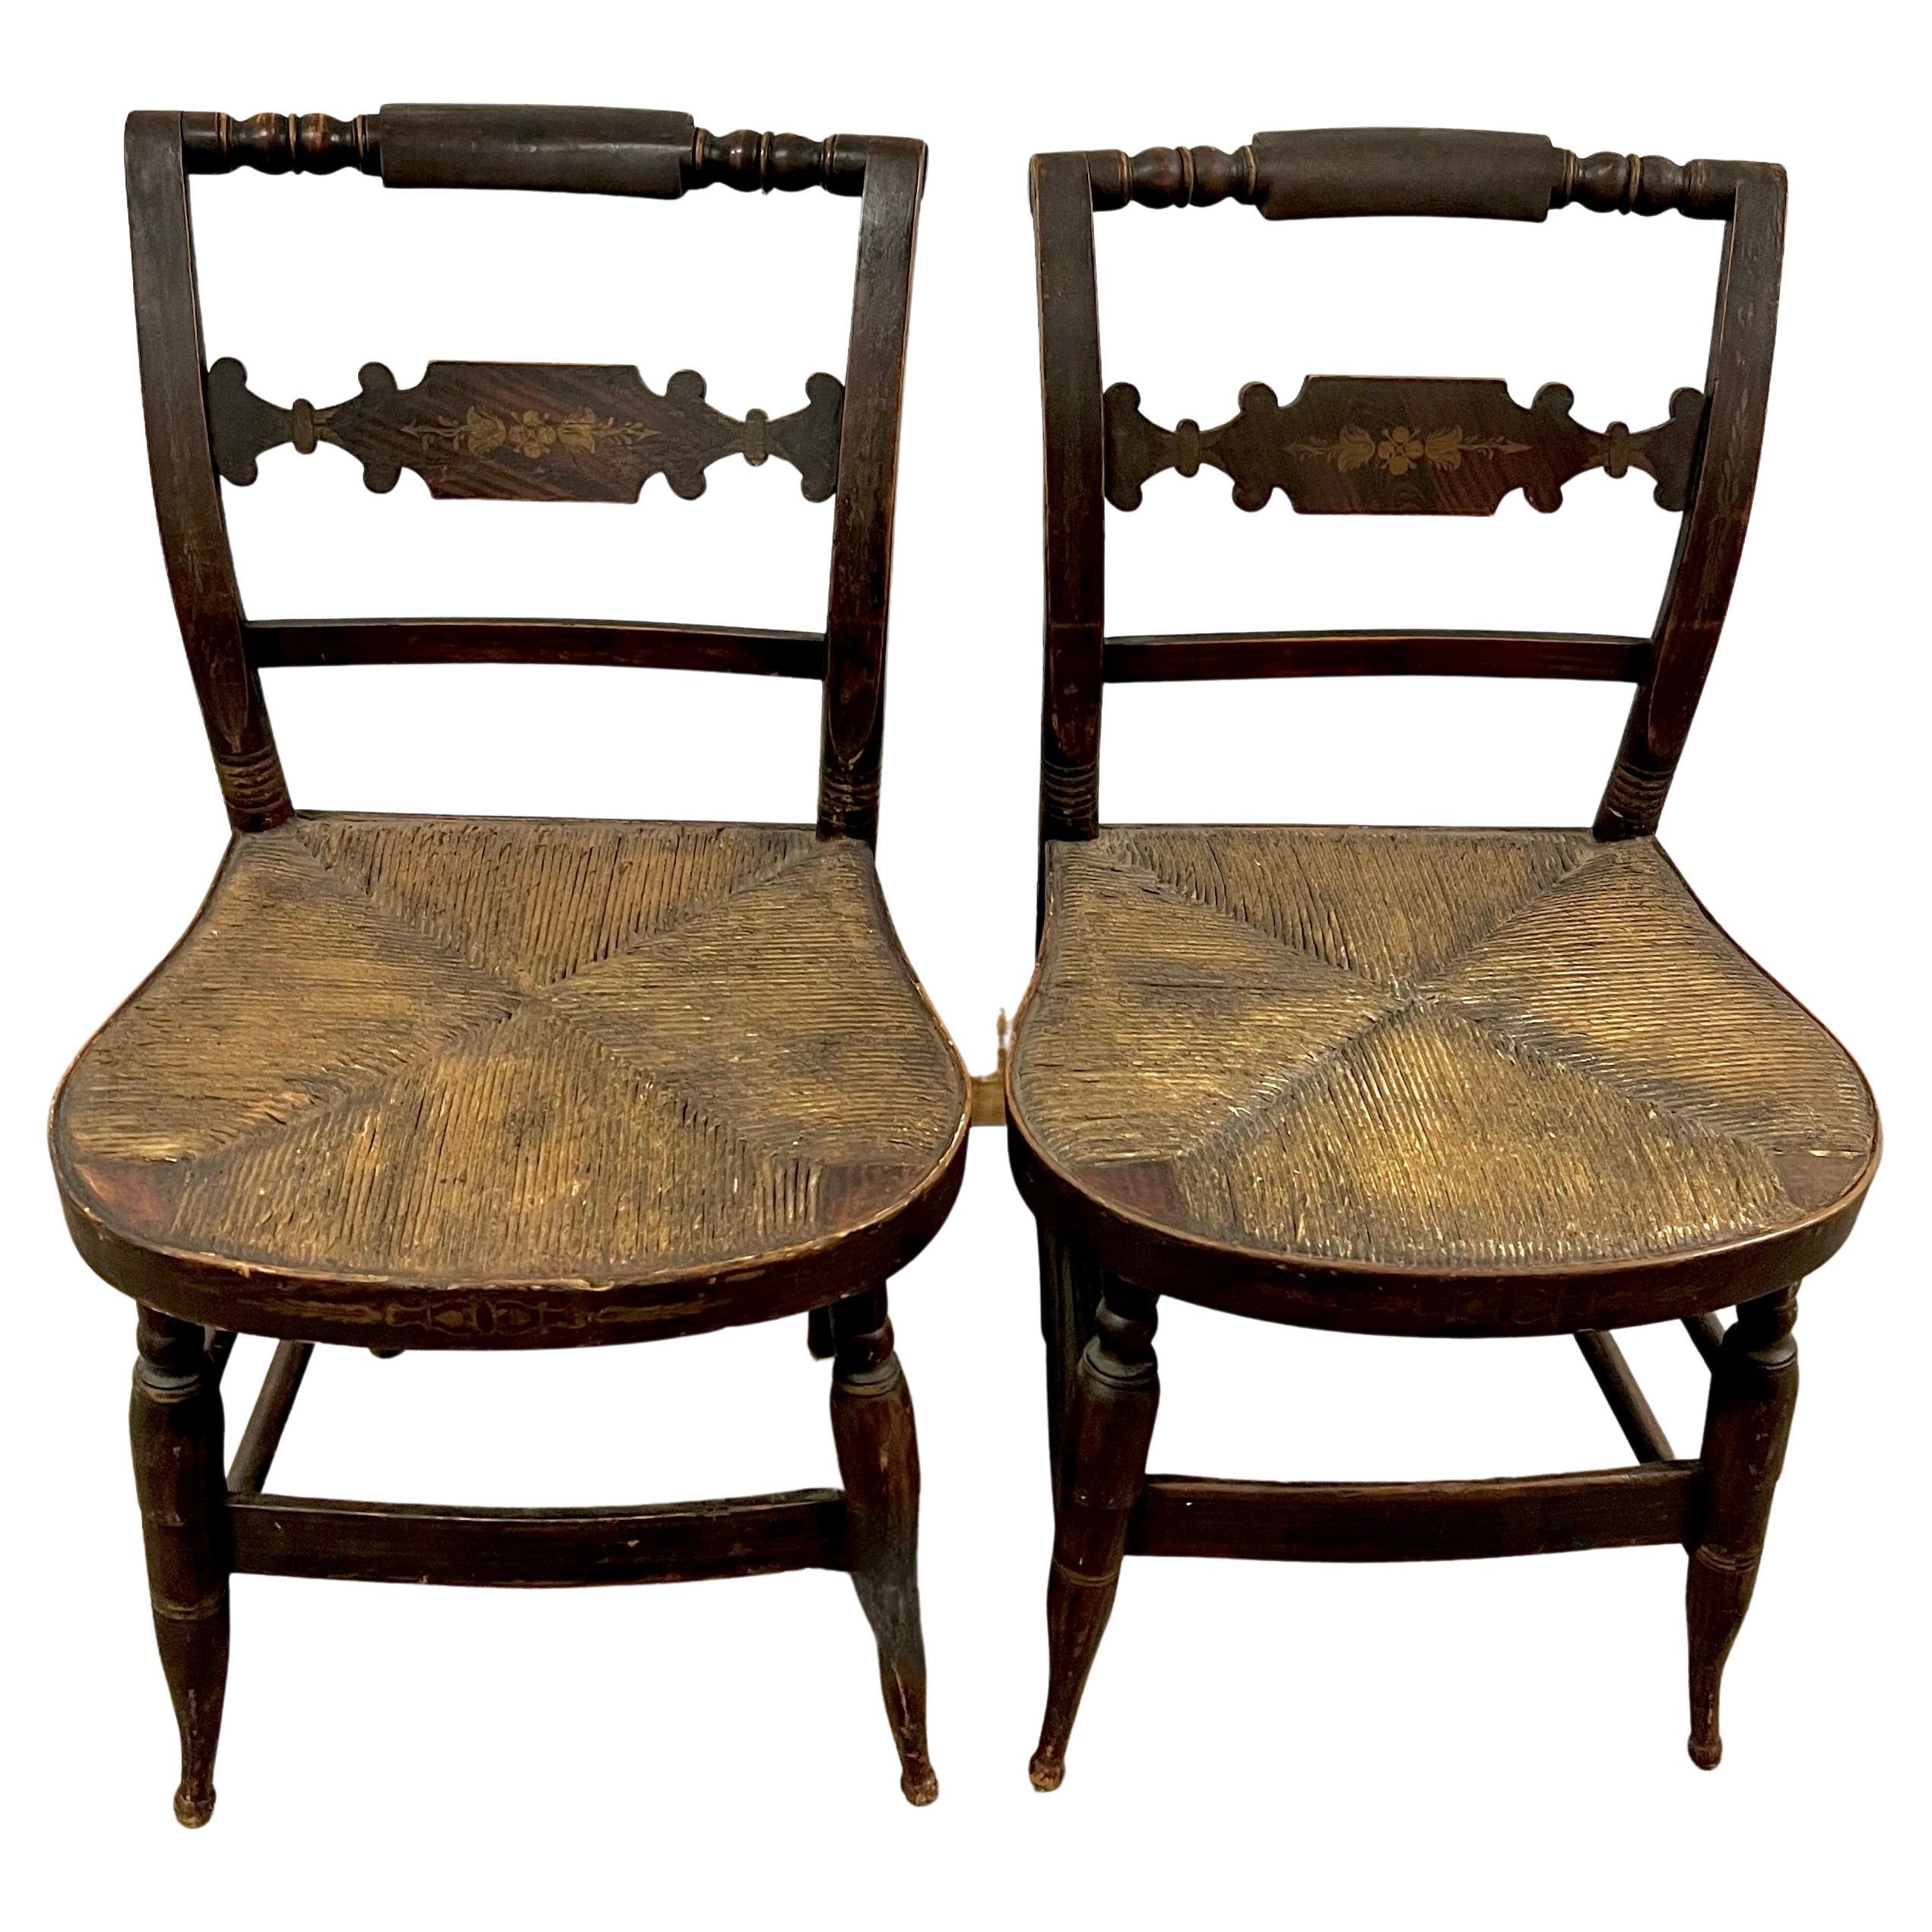 Pair of New England Hitchcock Style Chairs with Woven Rush Seats